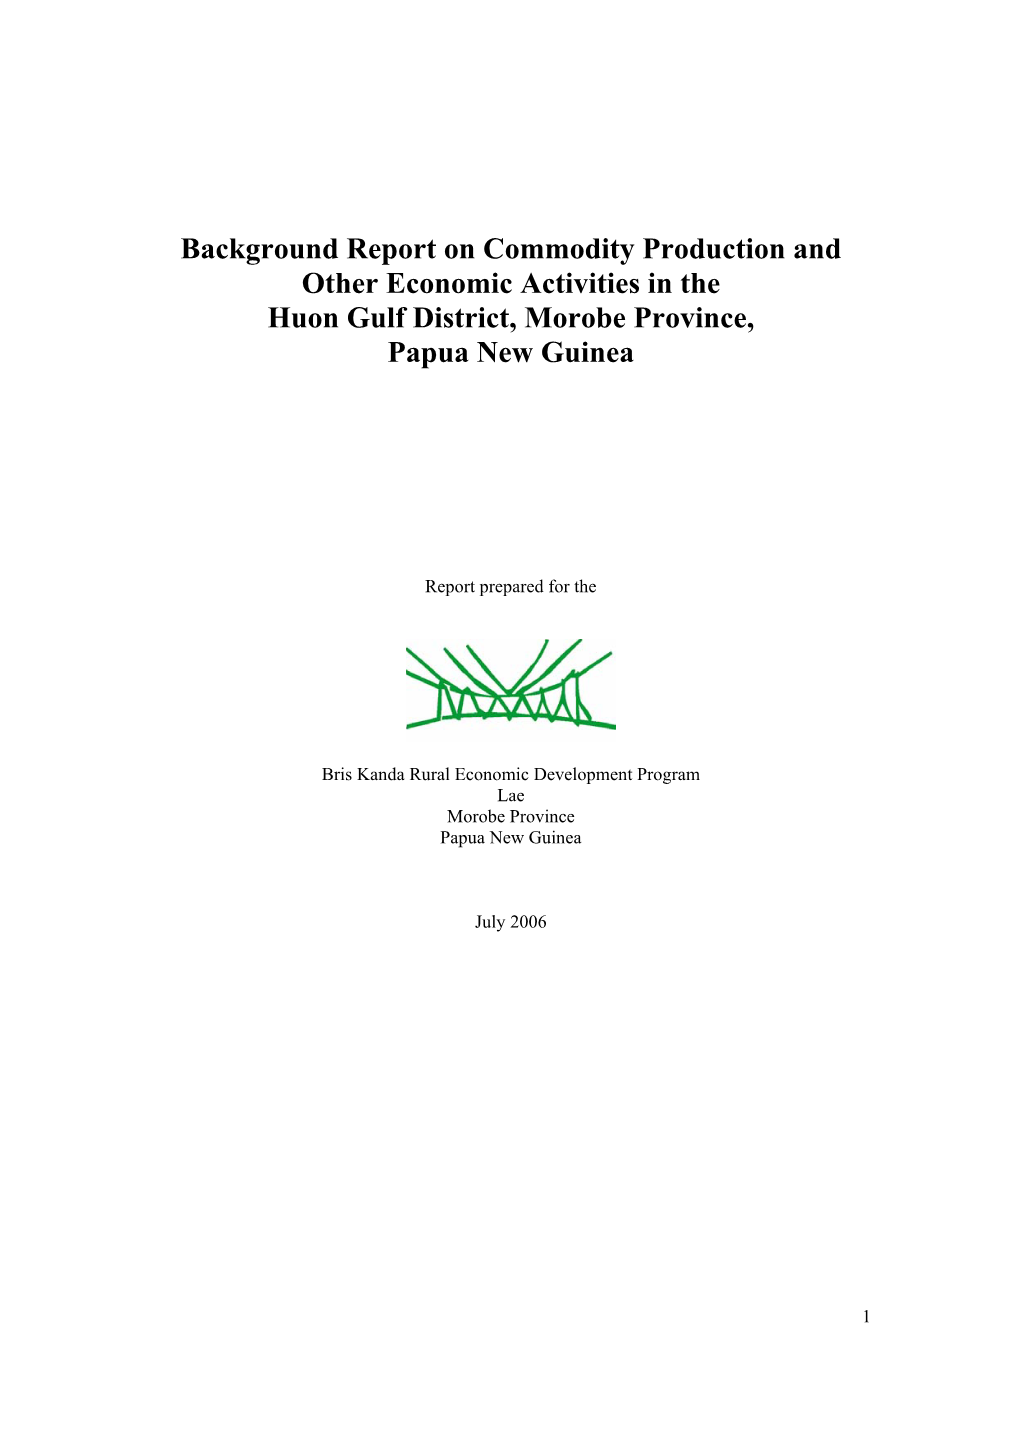 Background Report on Commodity Production and Other Economic Activities in the Huon Gulf District, Morobe Province, Papua New Guinea